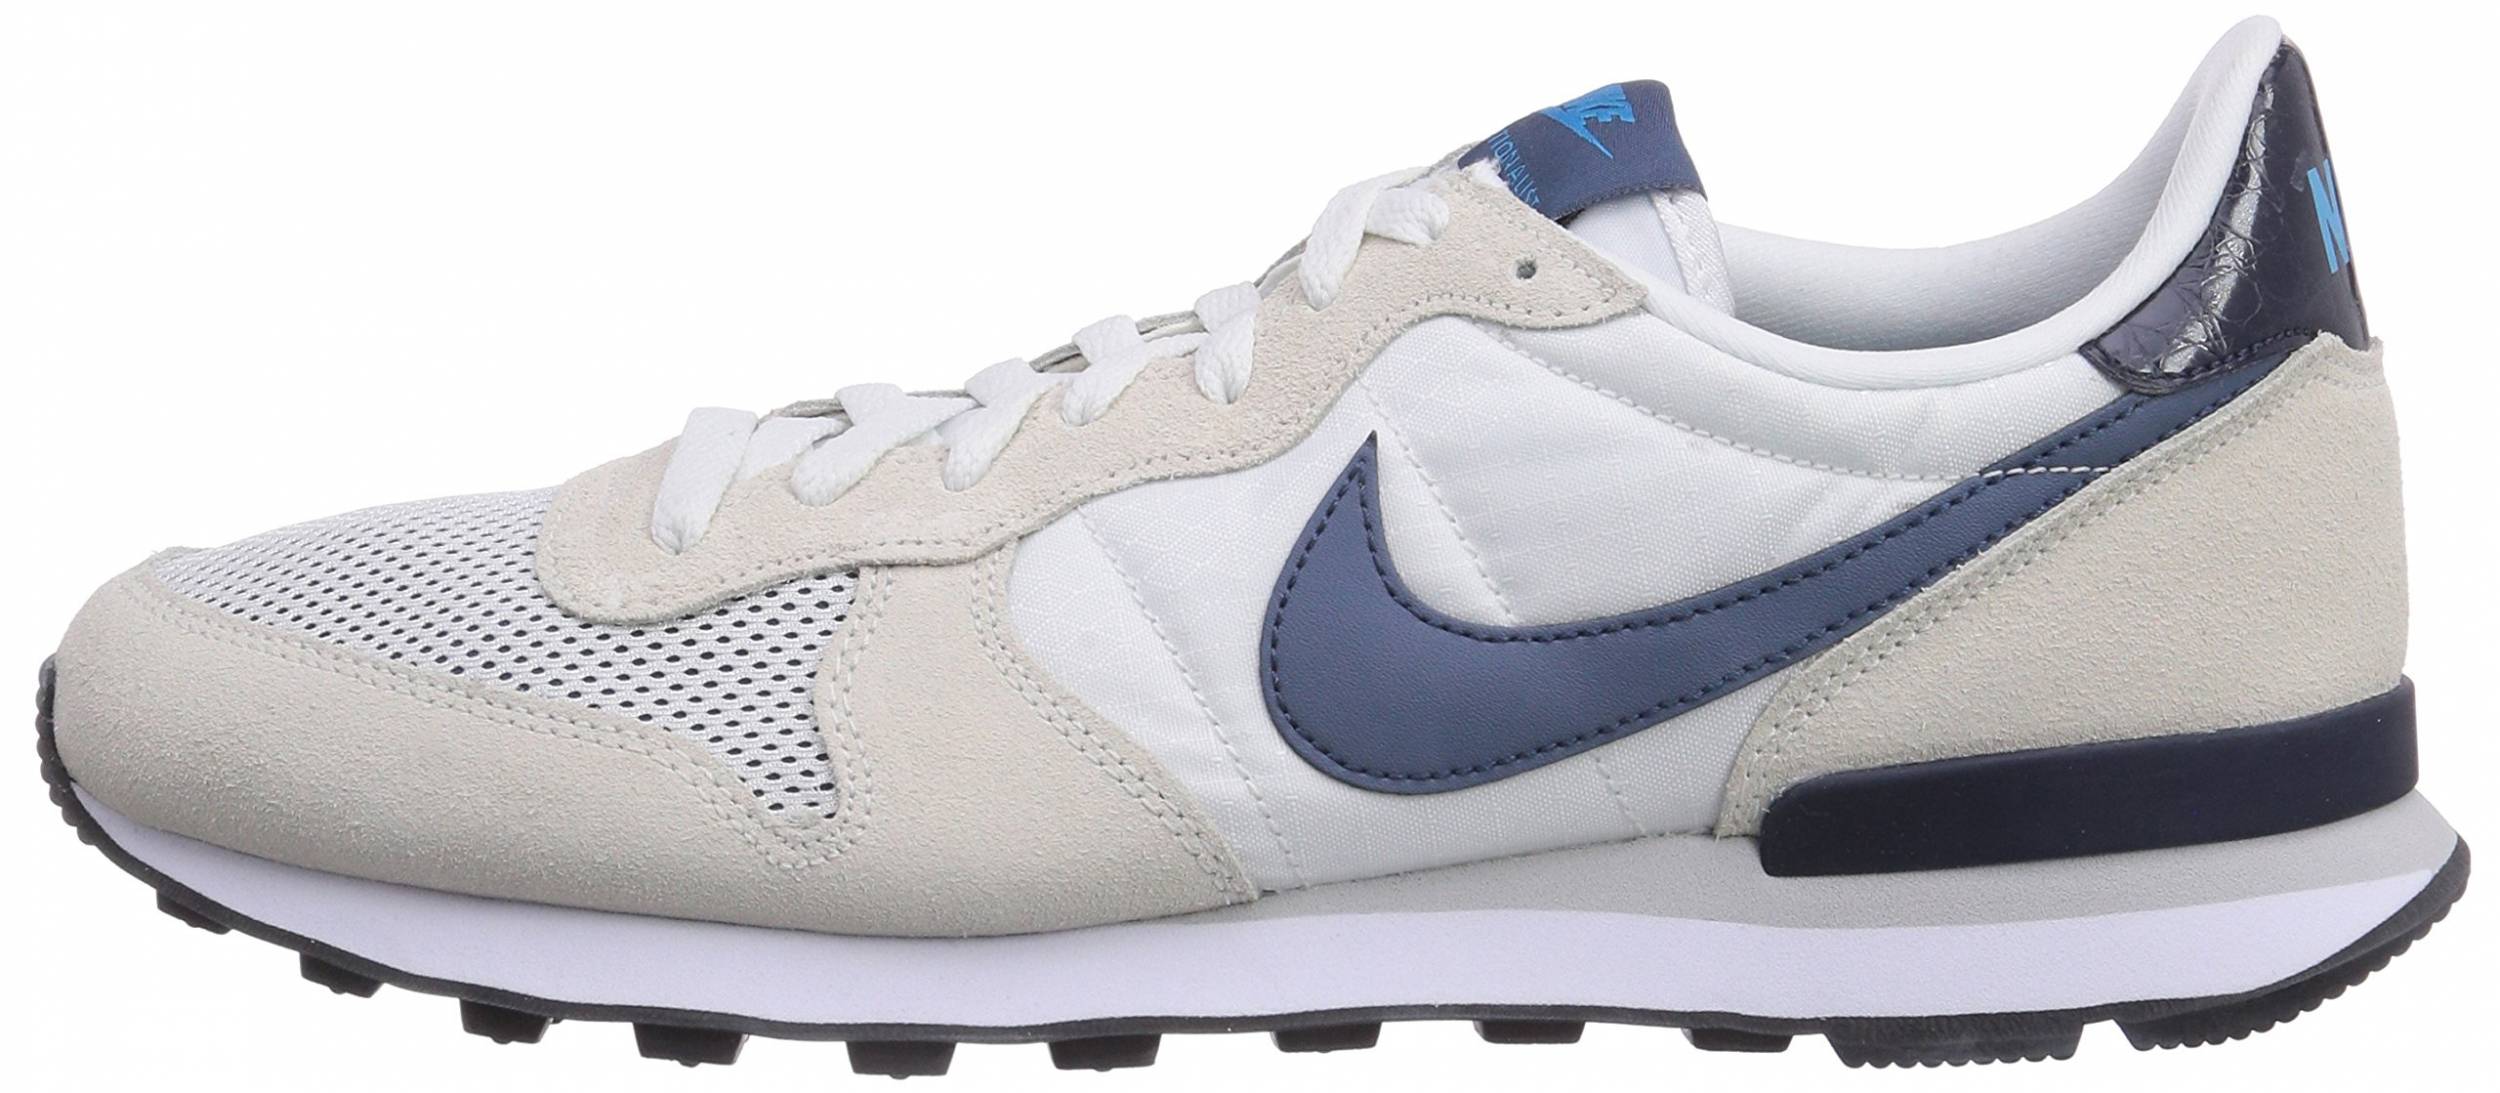 Viskeus galop Stadscentrum Infrastructure-intelligenceShops, solid white nike shox youth clearance  pants | Facts, Comparison, Nike Internationalist Review